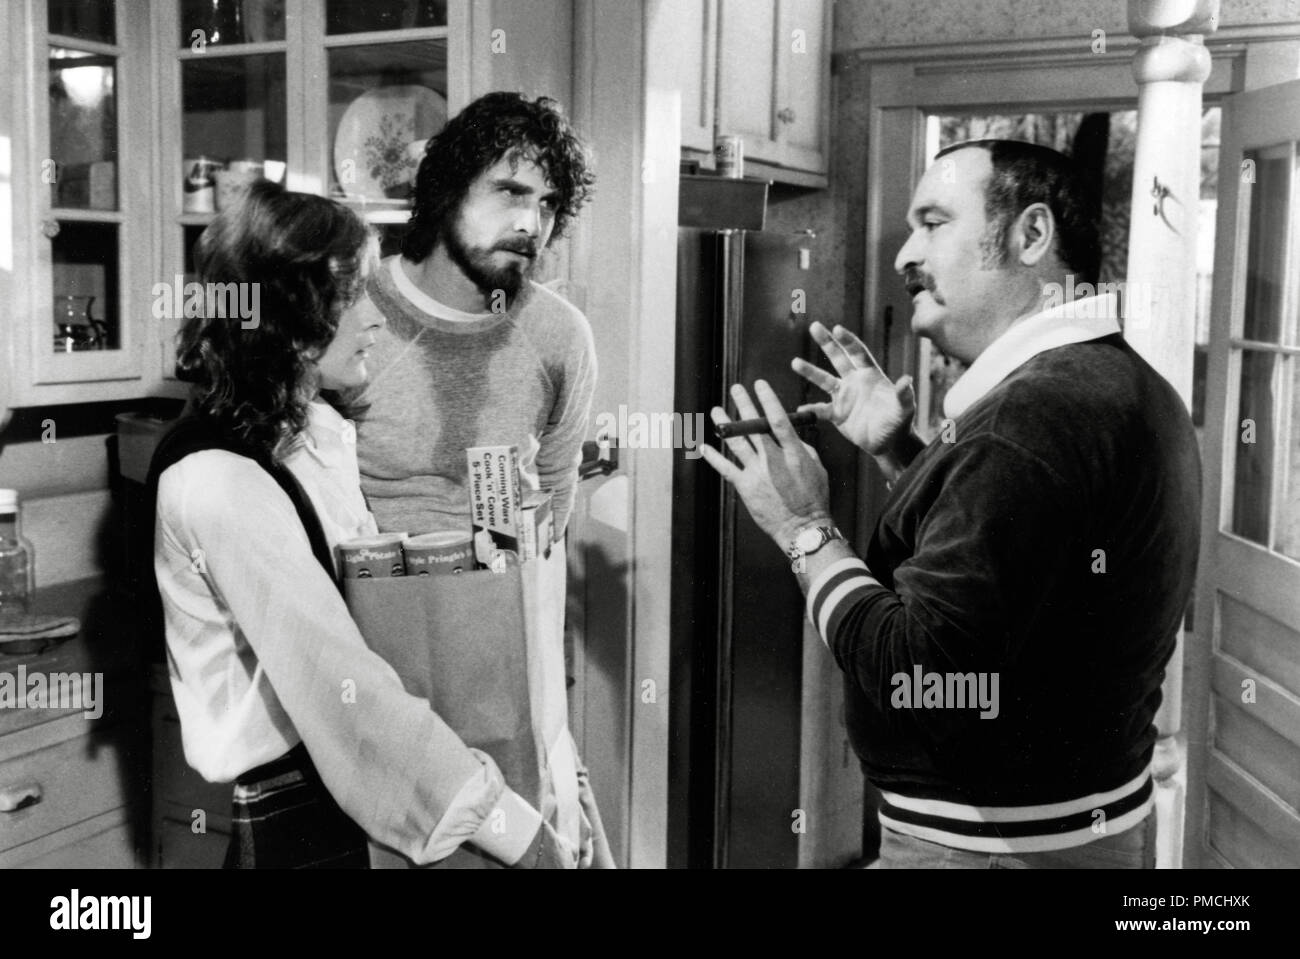 James Brolin, Margot Kidder, Director Stuart Rosenberg,  'The Amityville Horror' (1979) American International Pictures   File Reference # 33650 058THA  For Editorial Use Only -  All Rights Reserved Stock Photo